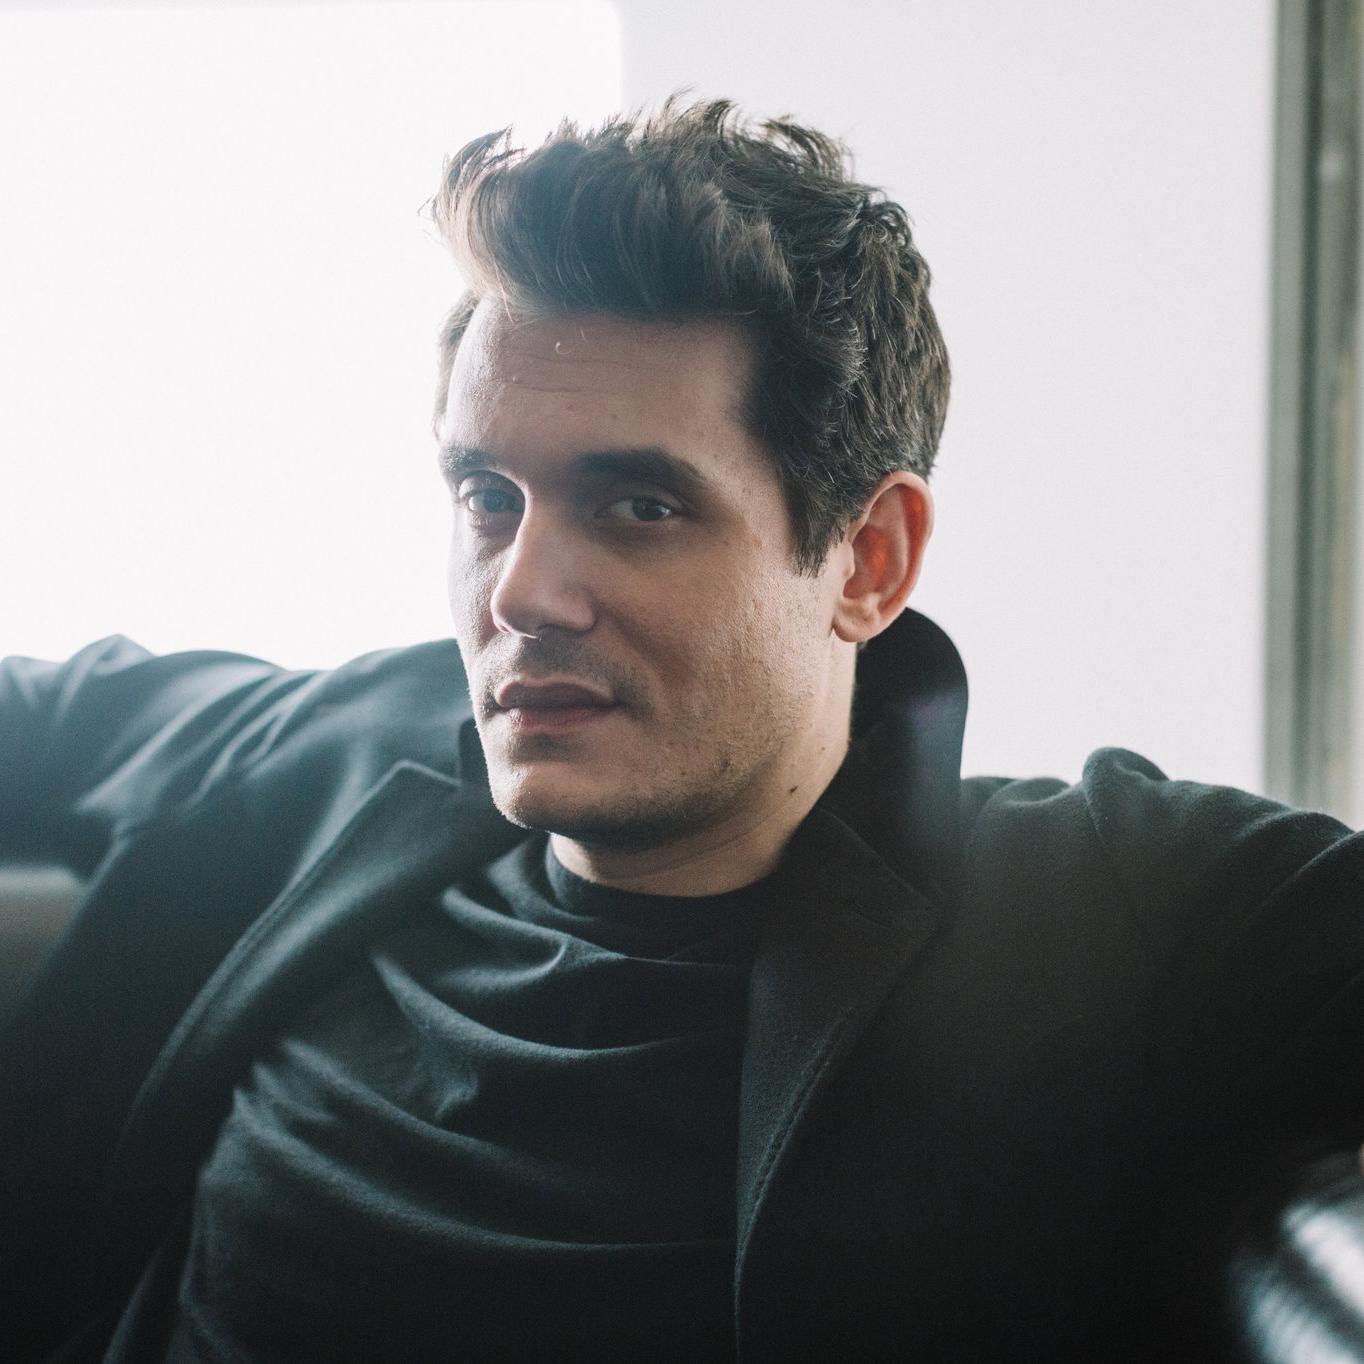 John Mayer photographed for article.